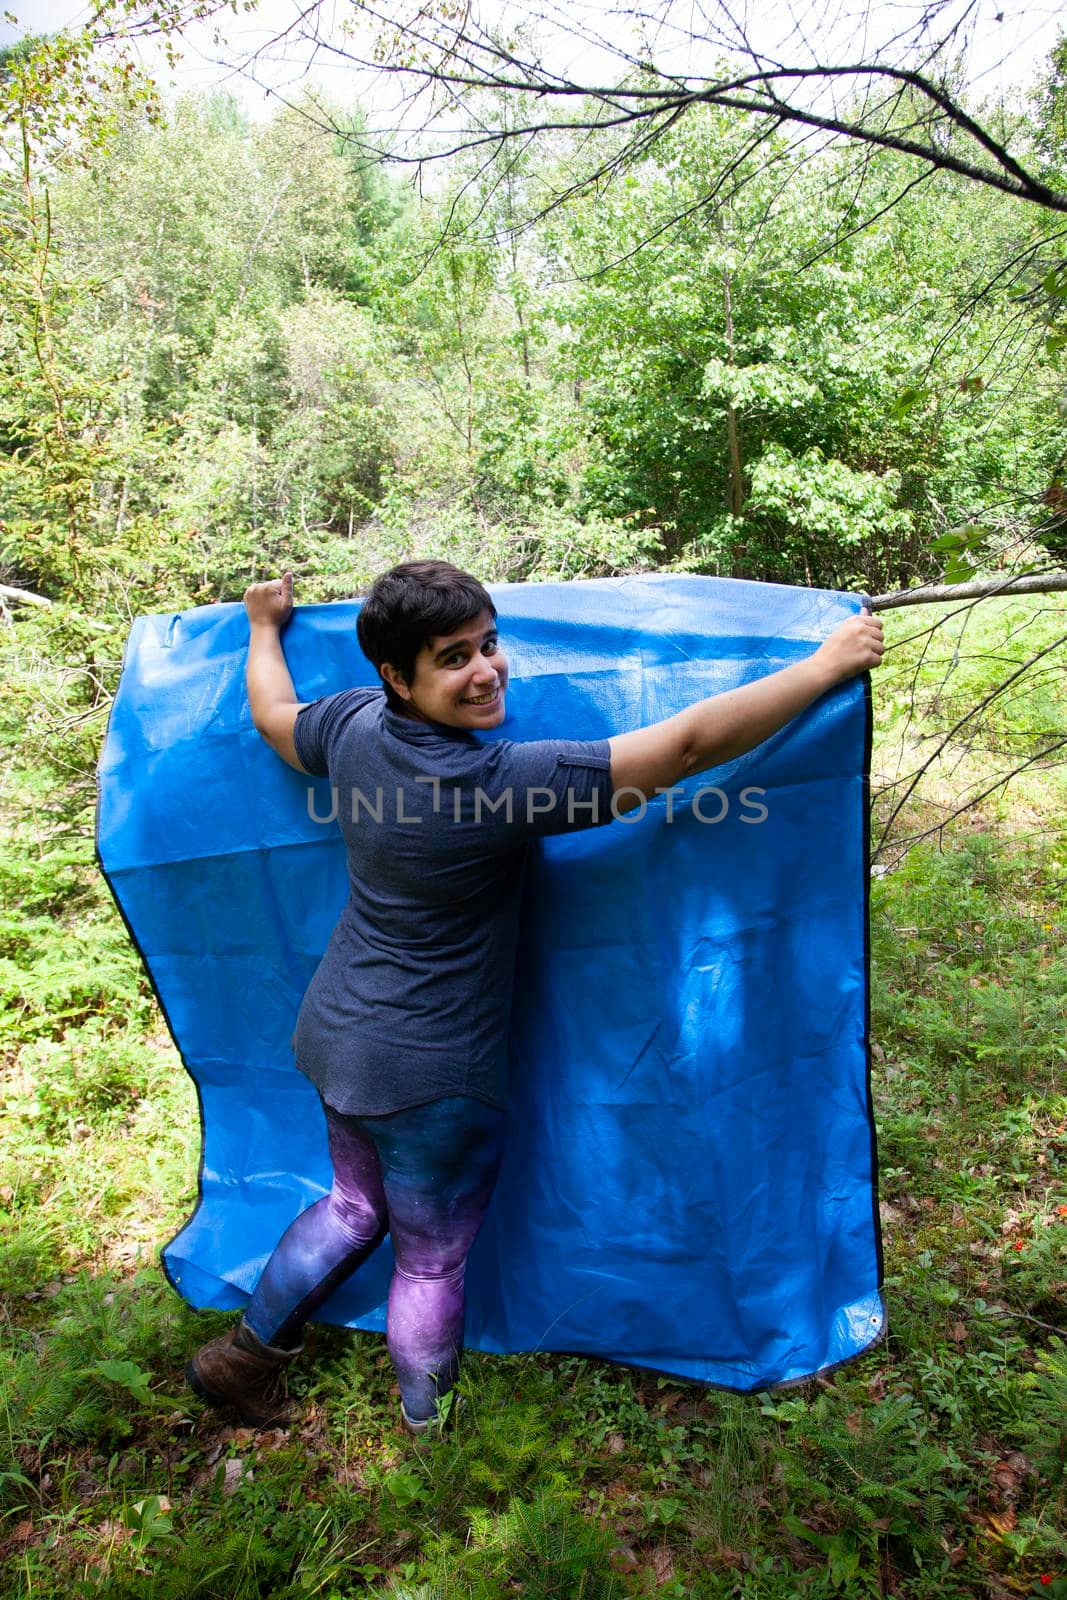  person camping or outdoors hangs up a blue tarp to dry in the sun 